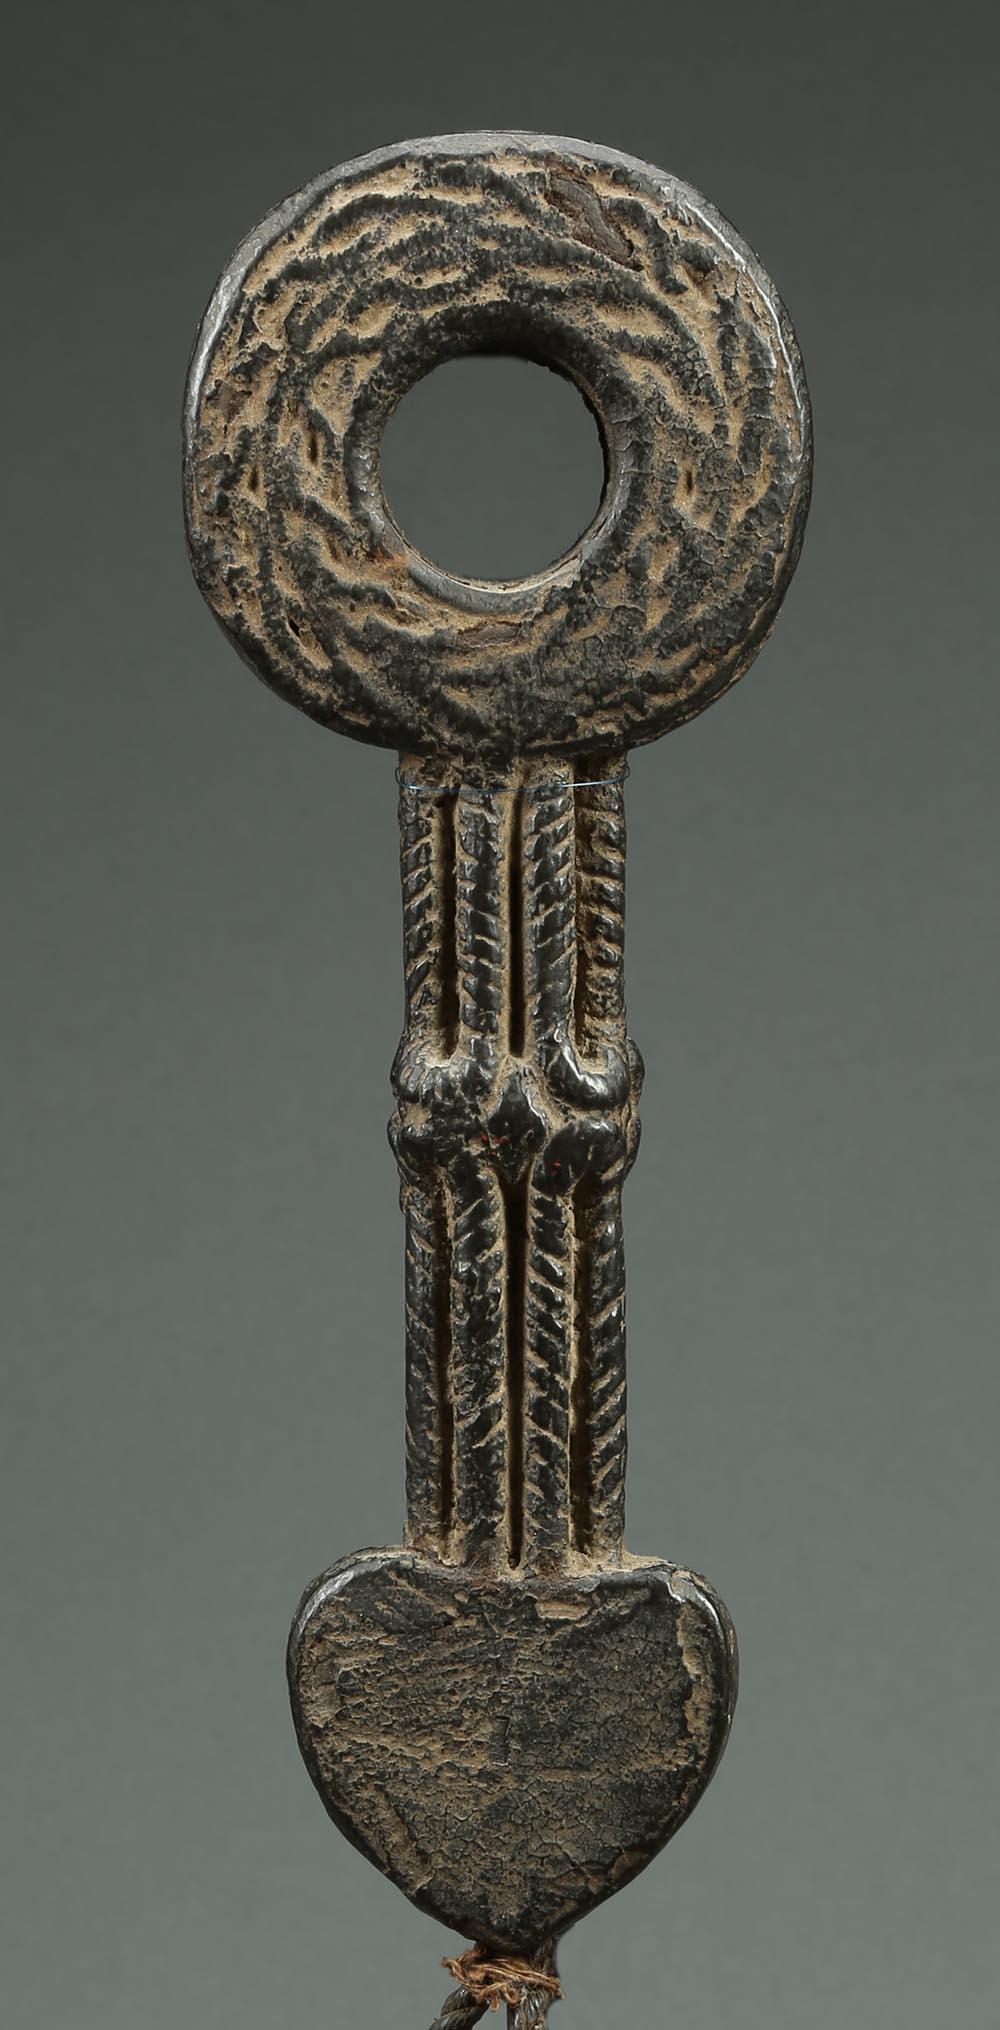 Nepalese Nepal Himalayan Butter Churn Handle, Early 20th Century with Heart Shape For Sale